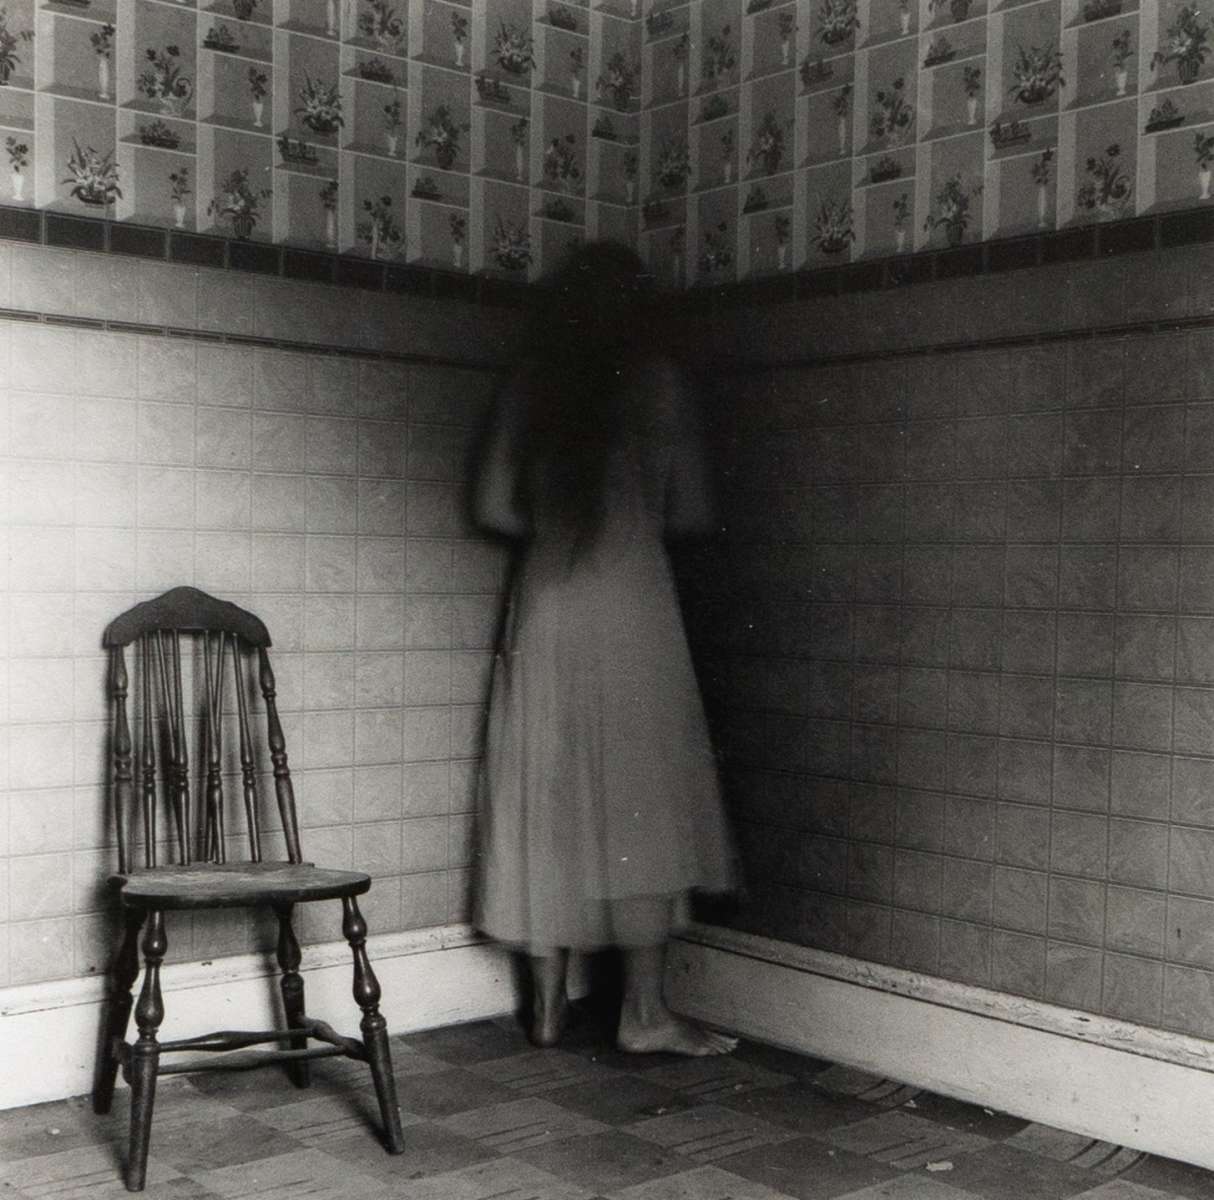 About going to see an exhibit of Francesca Woodman photographs at Jackson Fine Art in Atlanta 